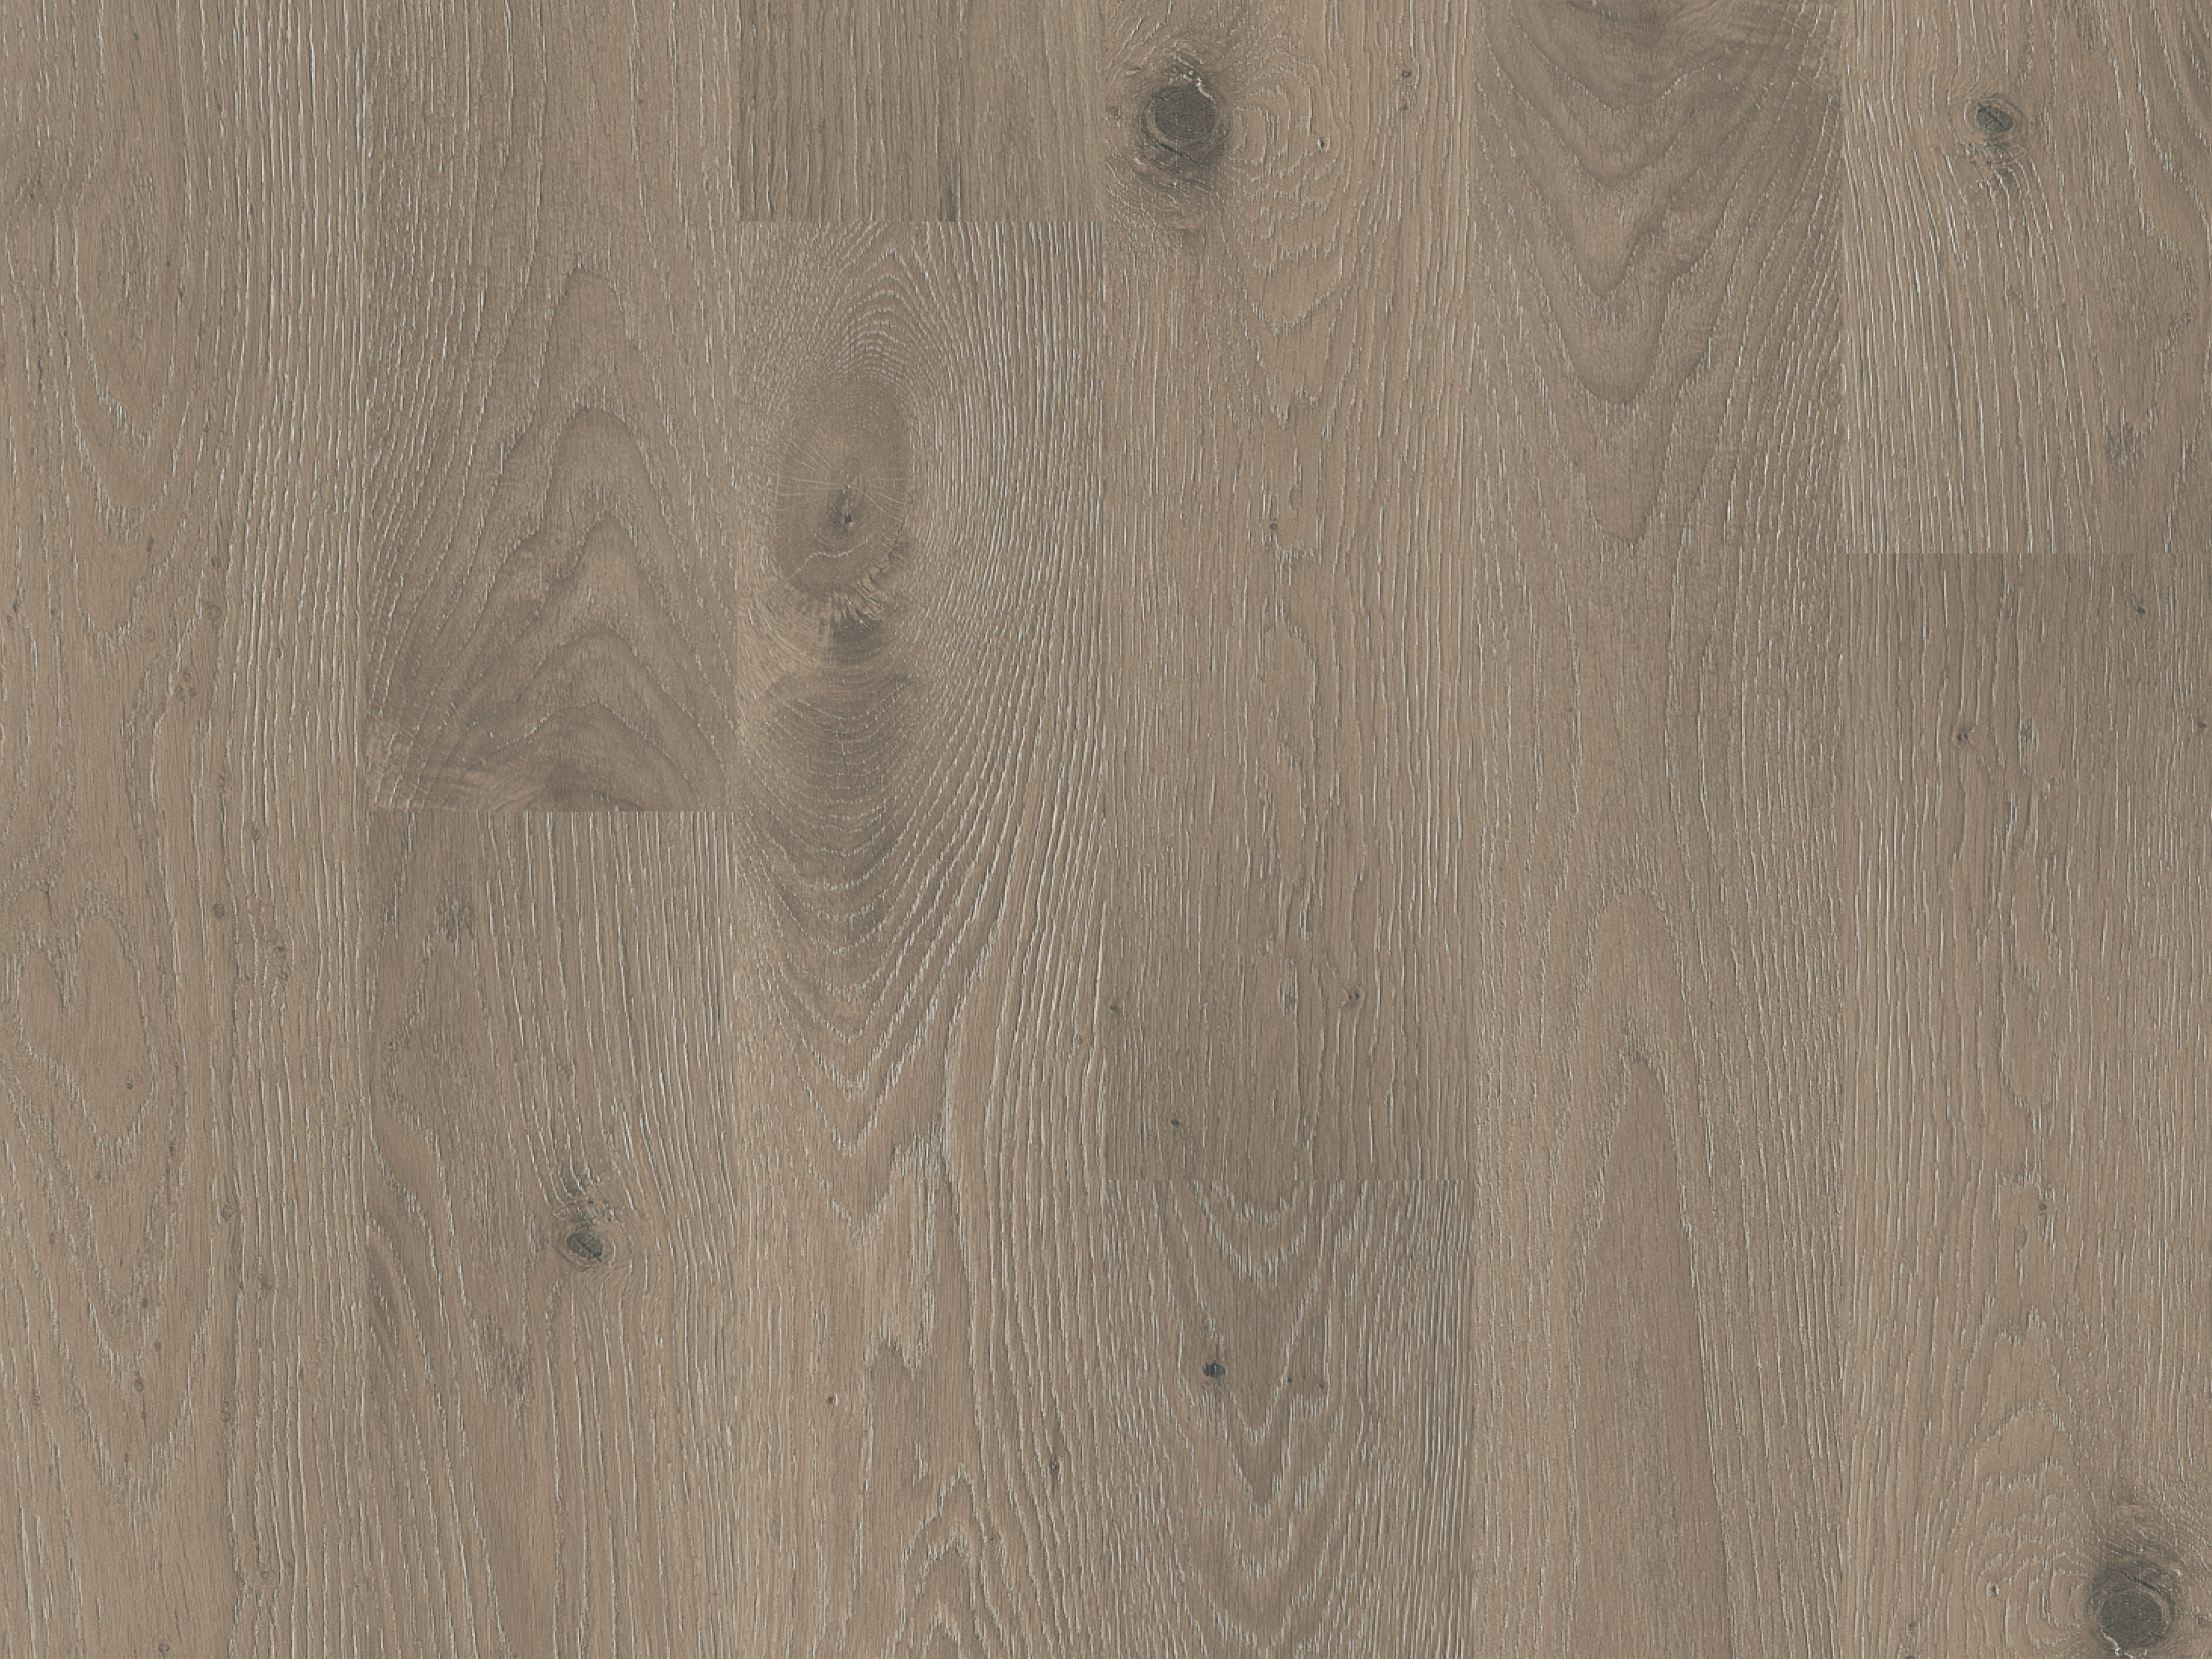 duchateau the guild lineage olivia european oak engineered hardnatural wood floor uv lacquer finish for interior use distributed by surface group international